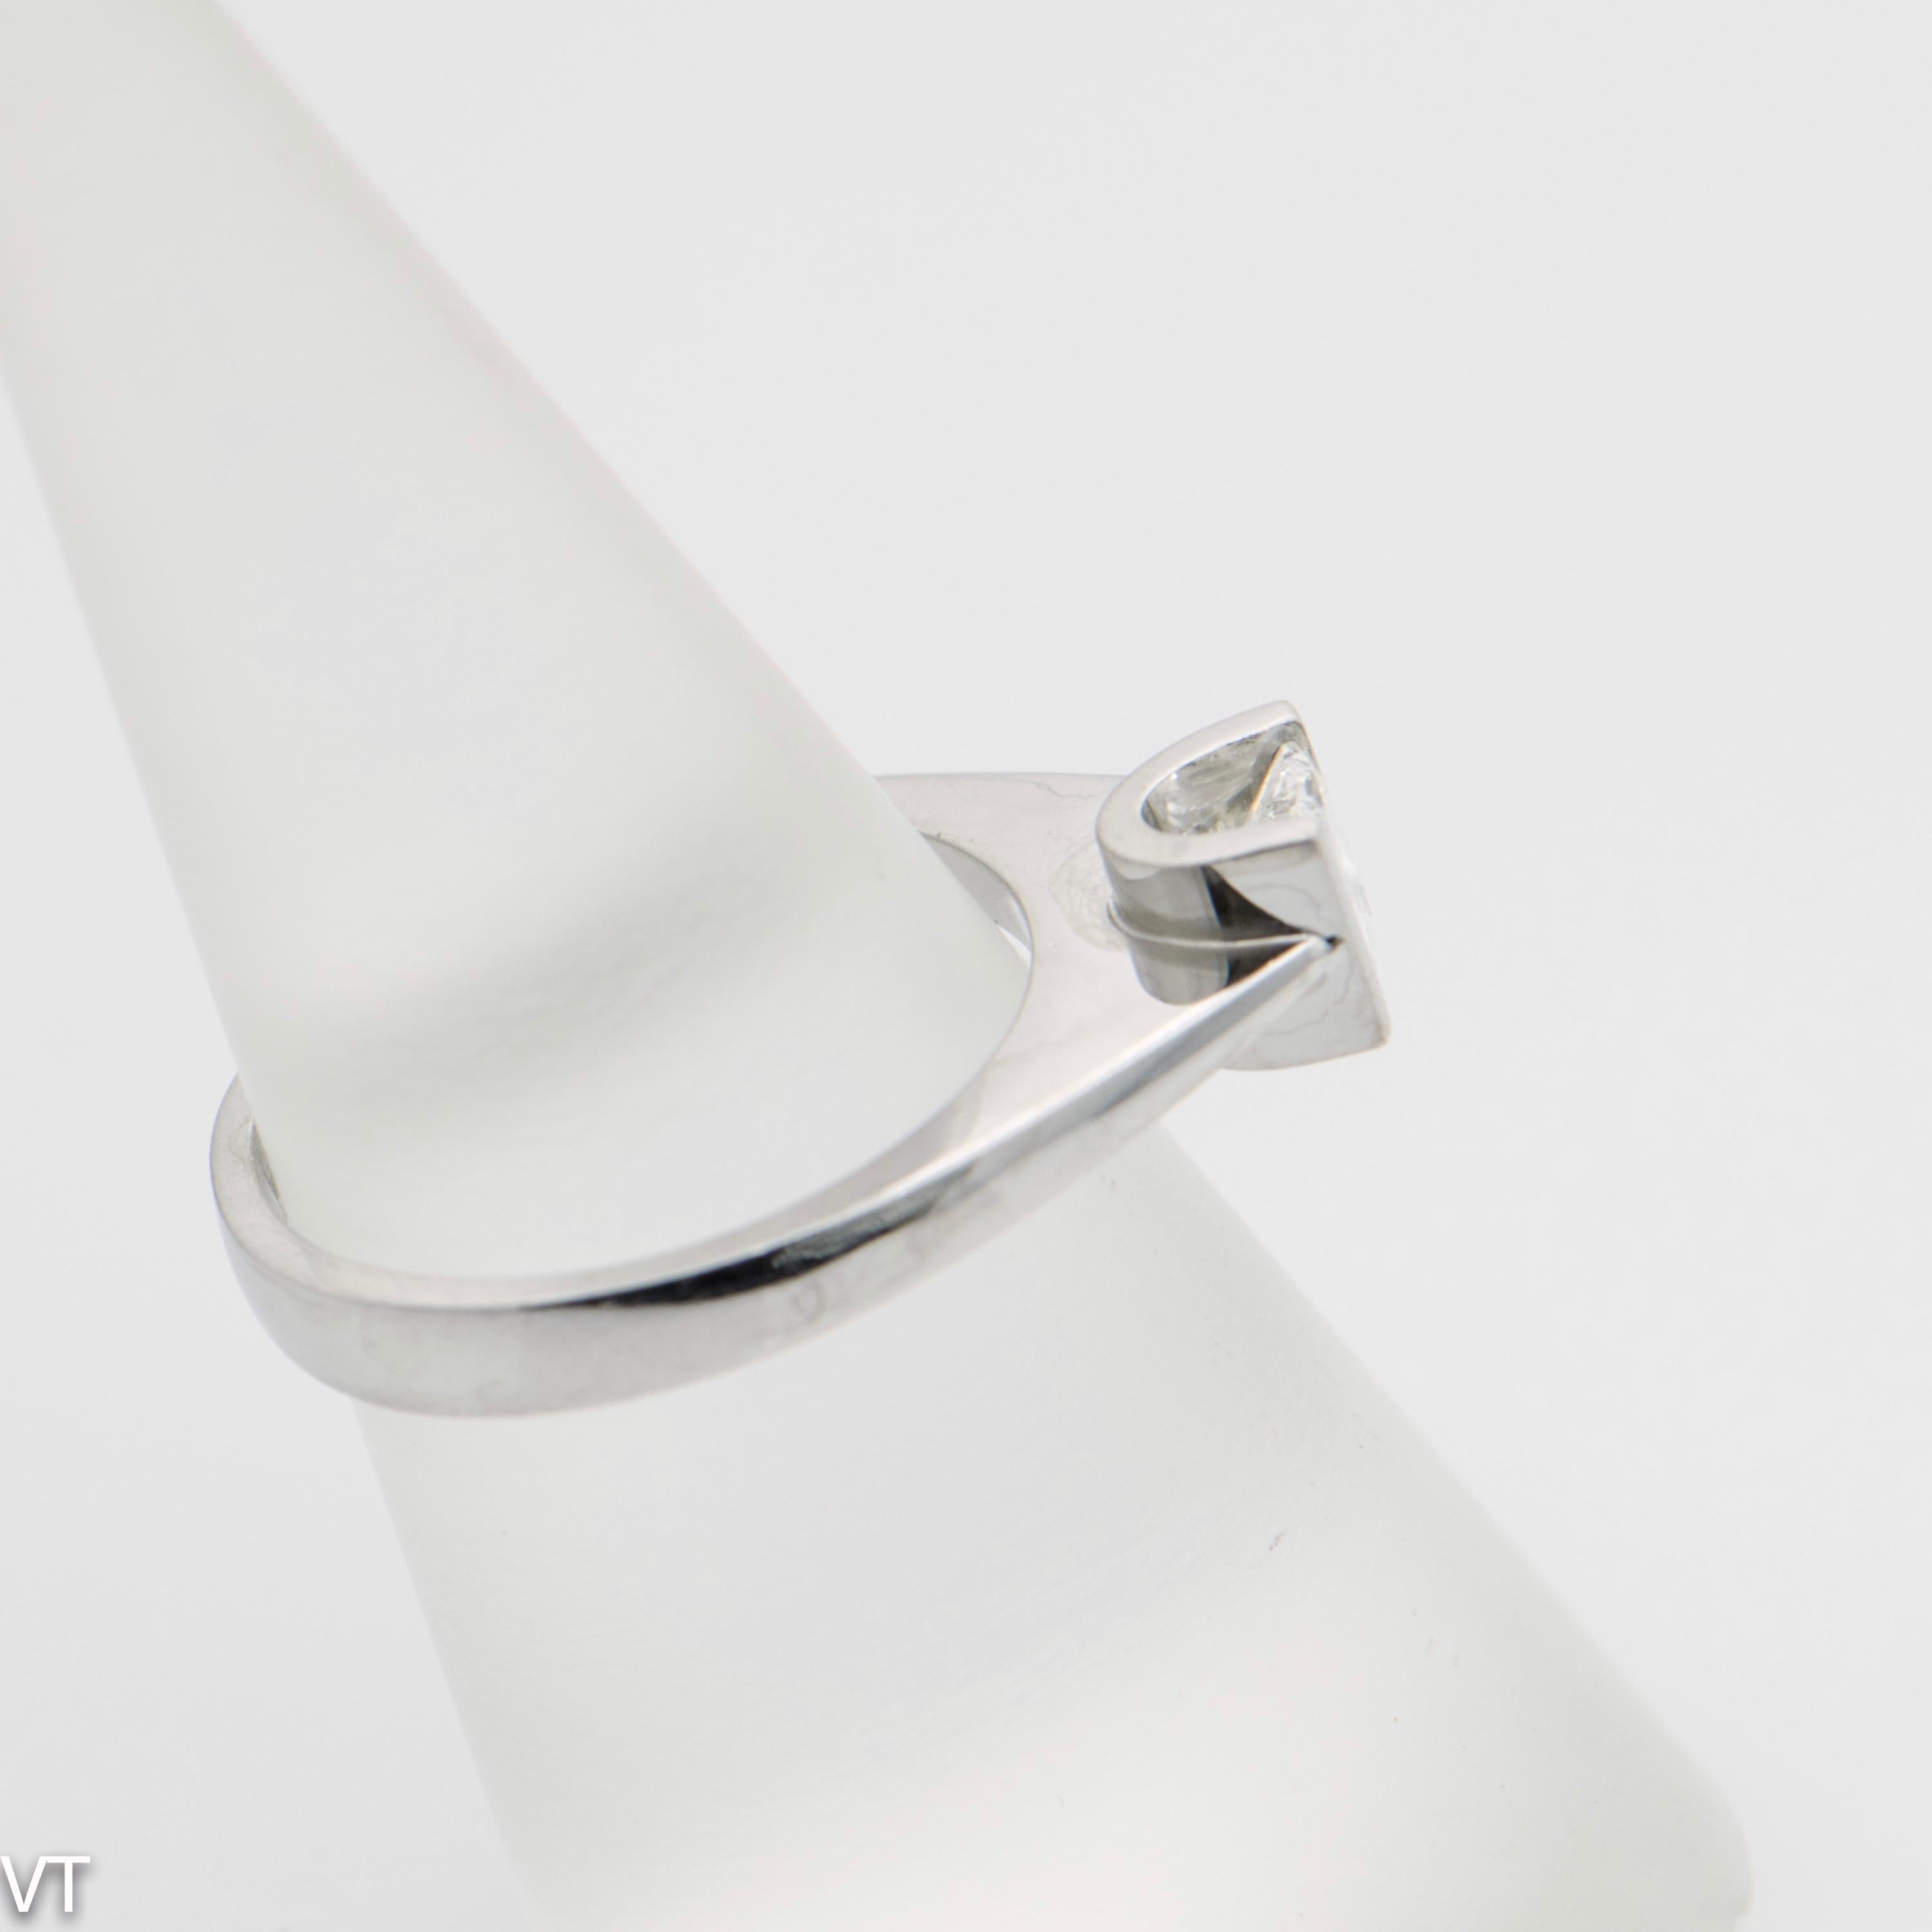 White 18 carat  White Gold Engagement  ring U-set with one Natural Diamond. Weight 0.51 Carats, Princess Cut, Colour G, Clarity VVS, Size N (US size 6 1/2). Total weight of the ring 4.9 gr. 